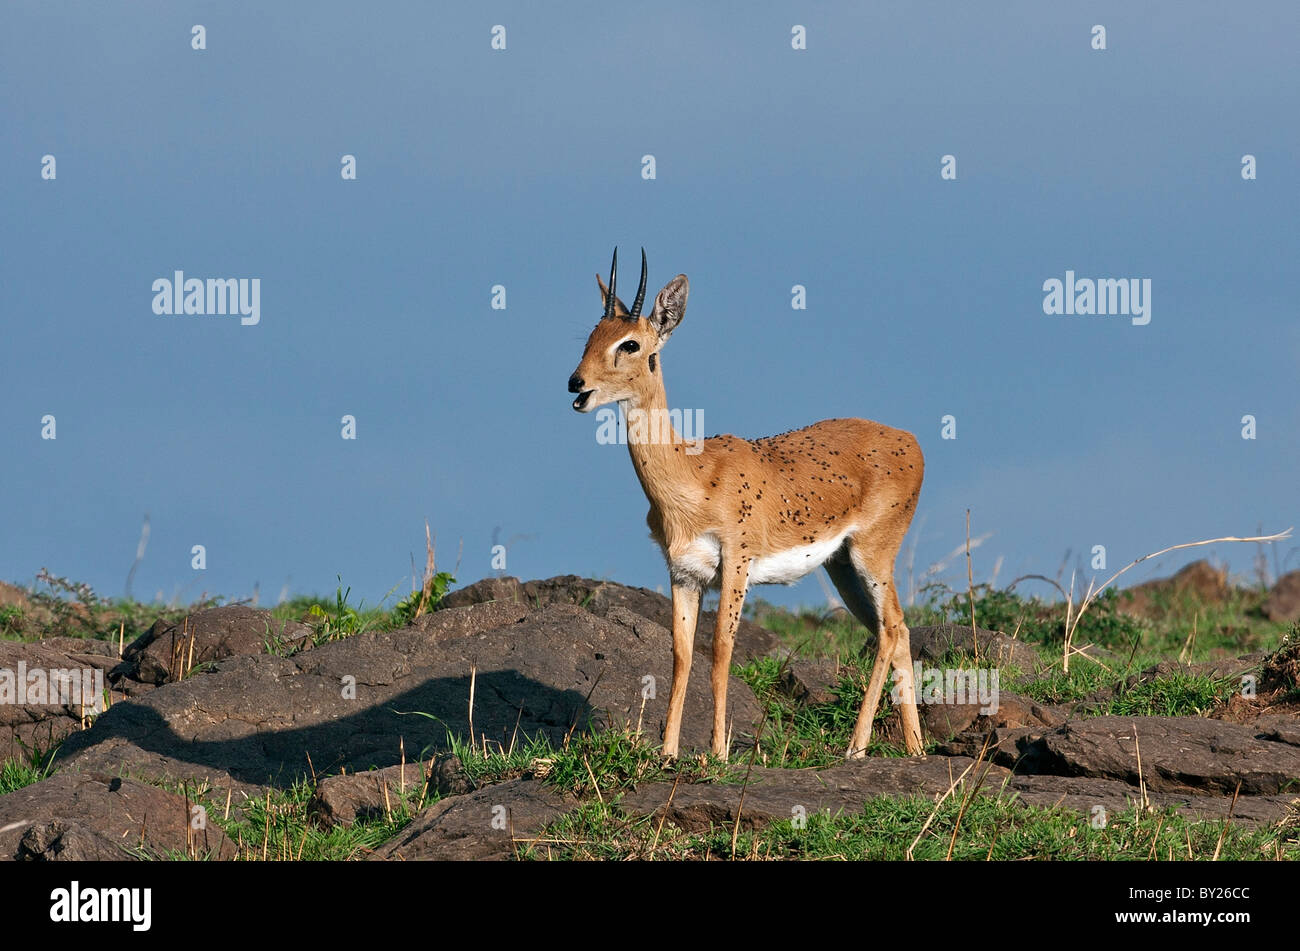 An Oribi covered in flies lets out a whistling call in Masai-Mara National Reserve. Stock Photo